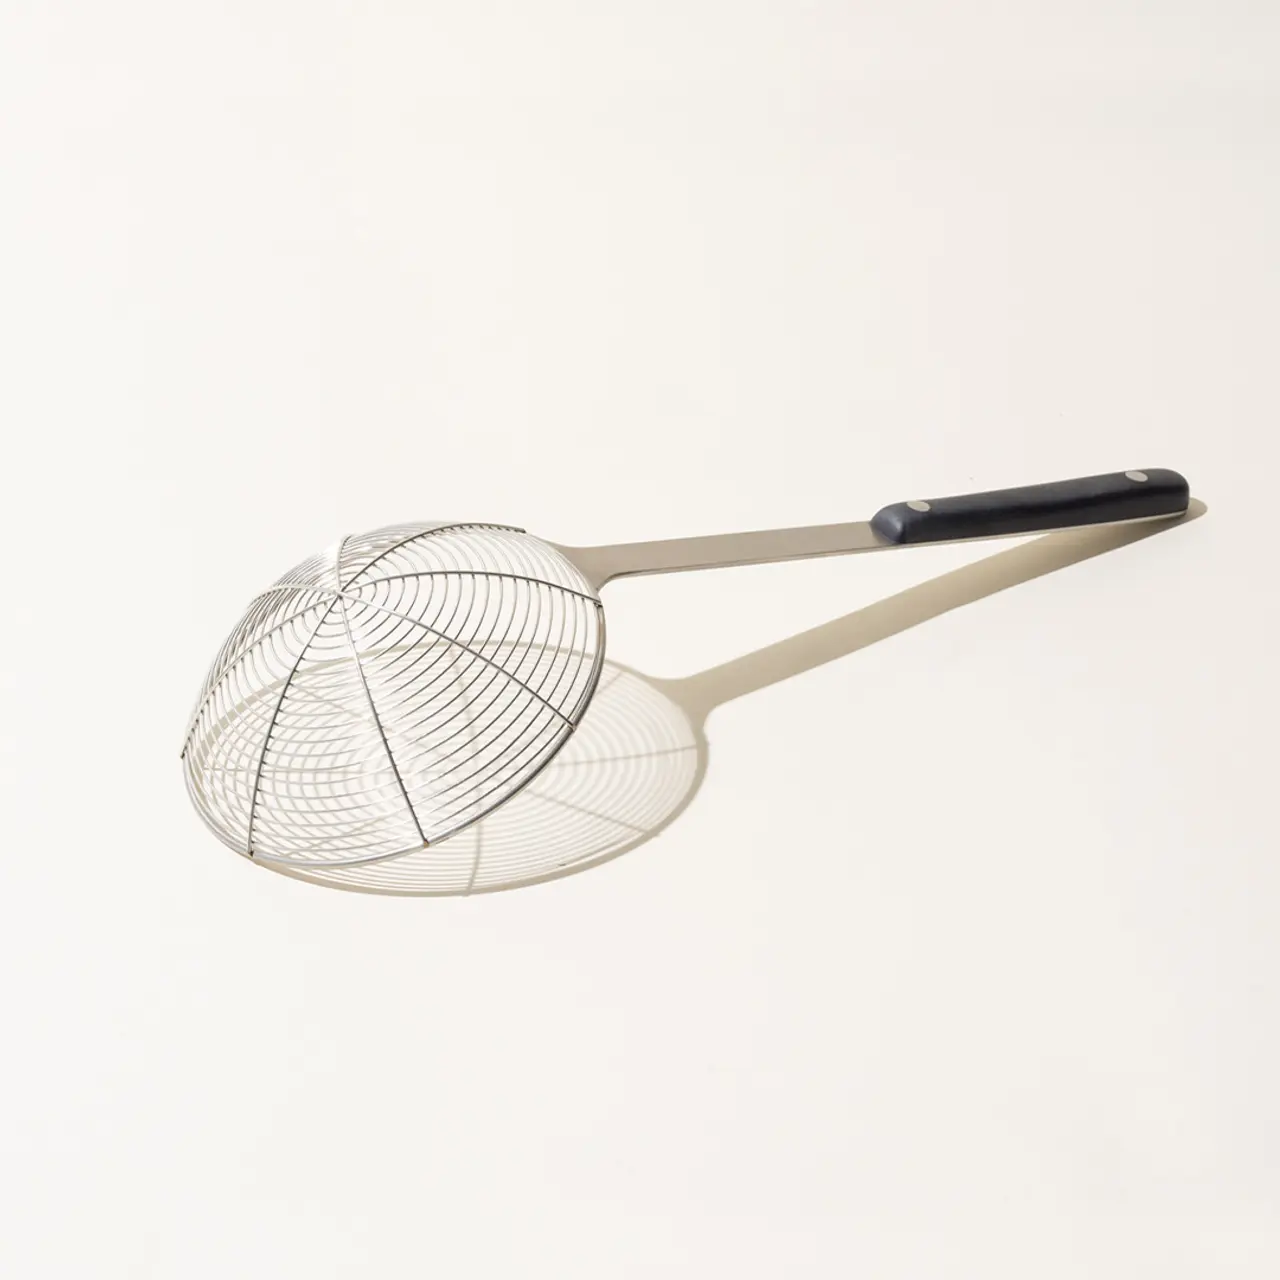 A stainless steel spider strainer with a long handle on a light background.